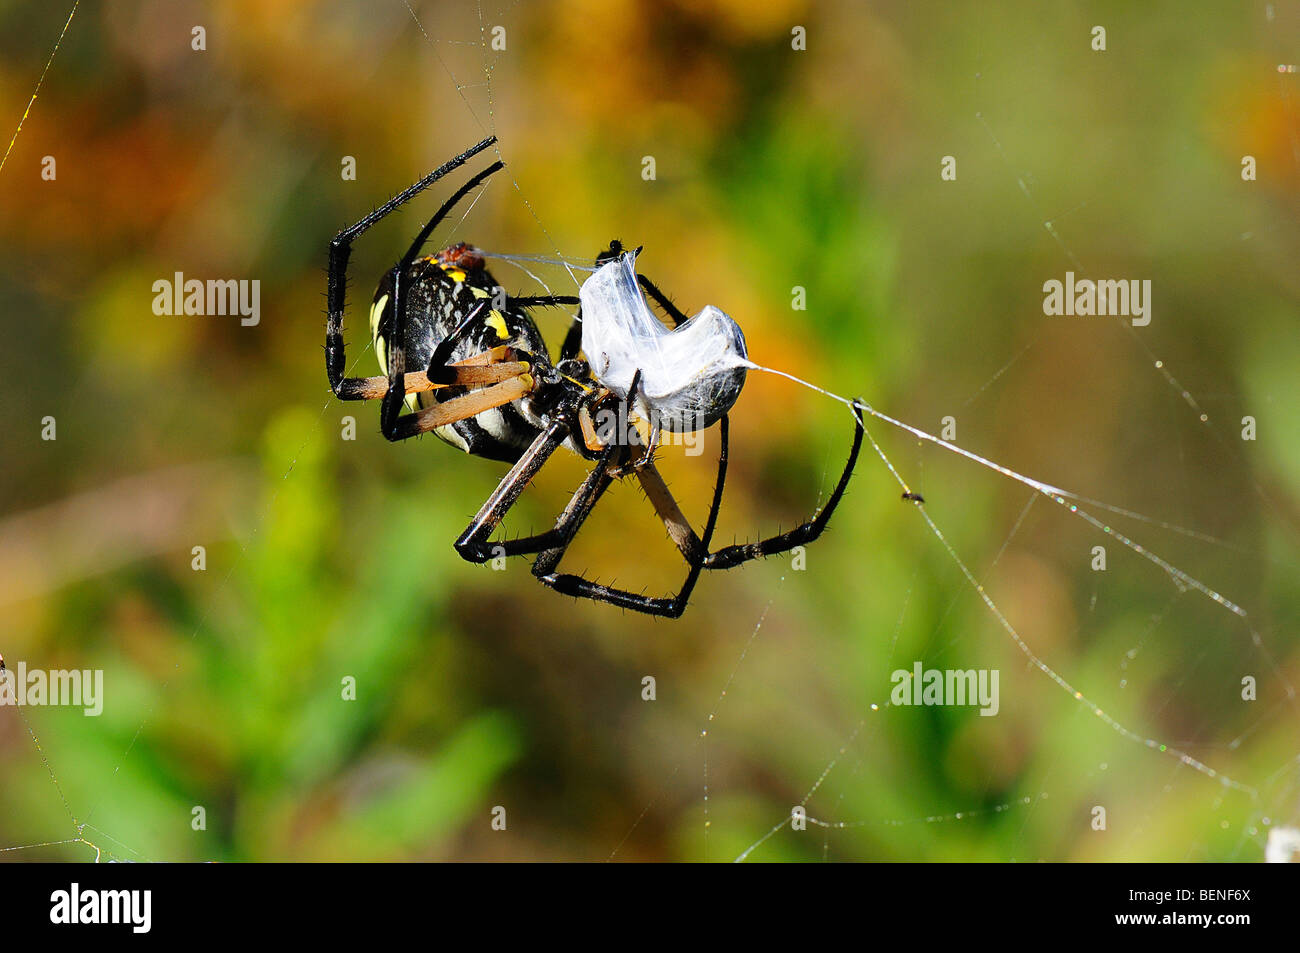 Yellow garden spider, insect caught in spider web Stock Photo